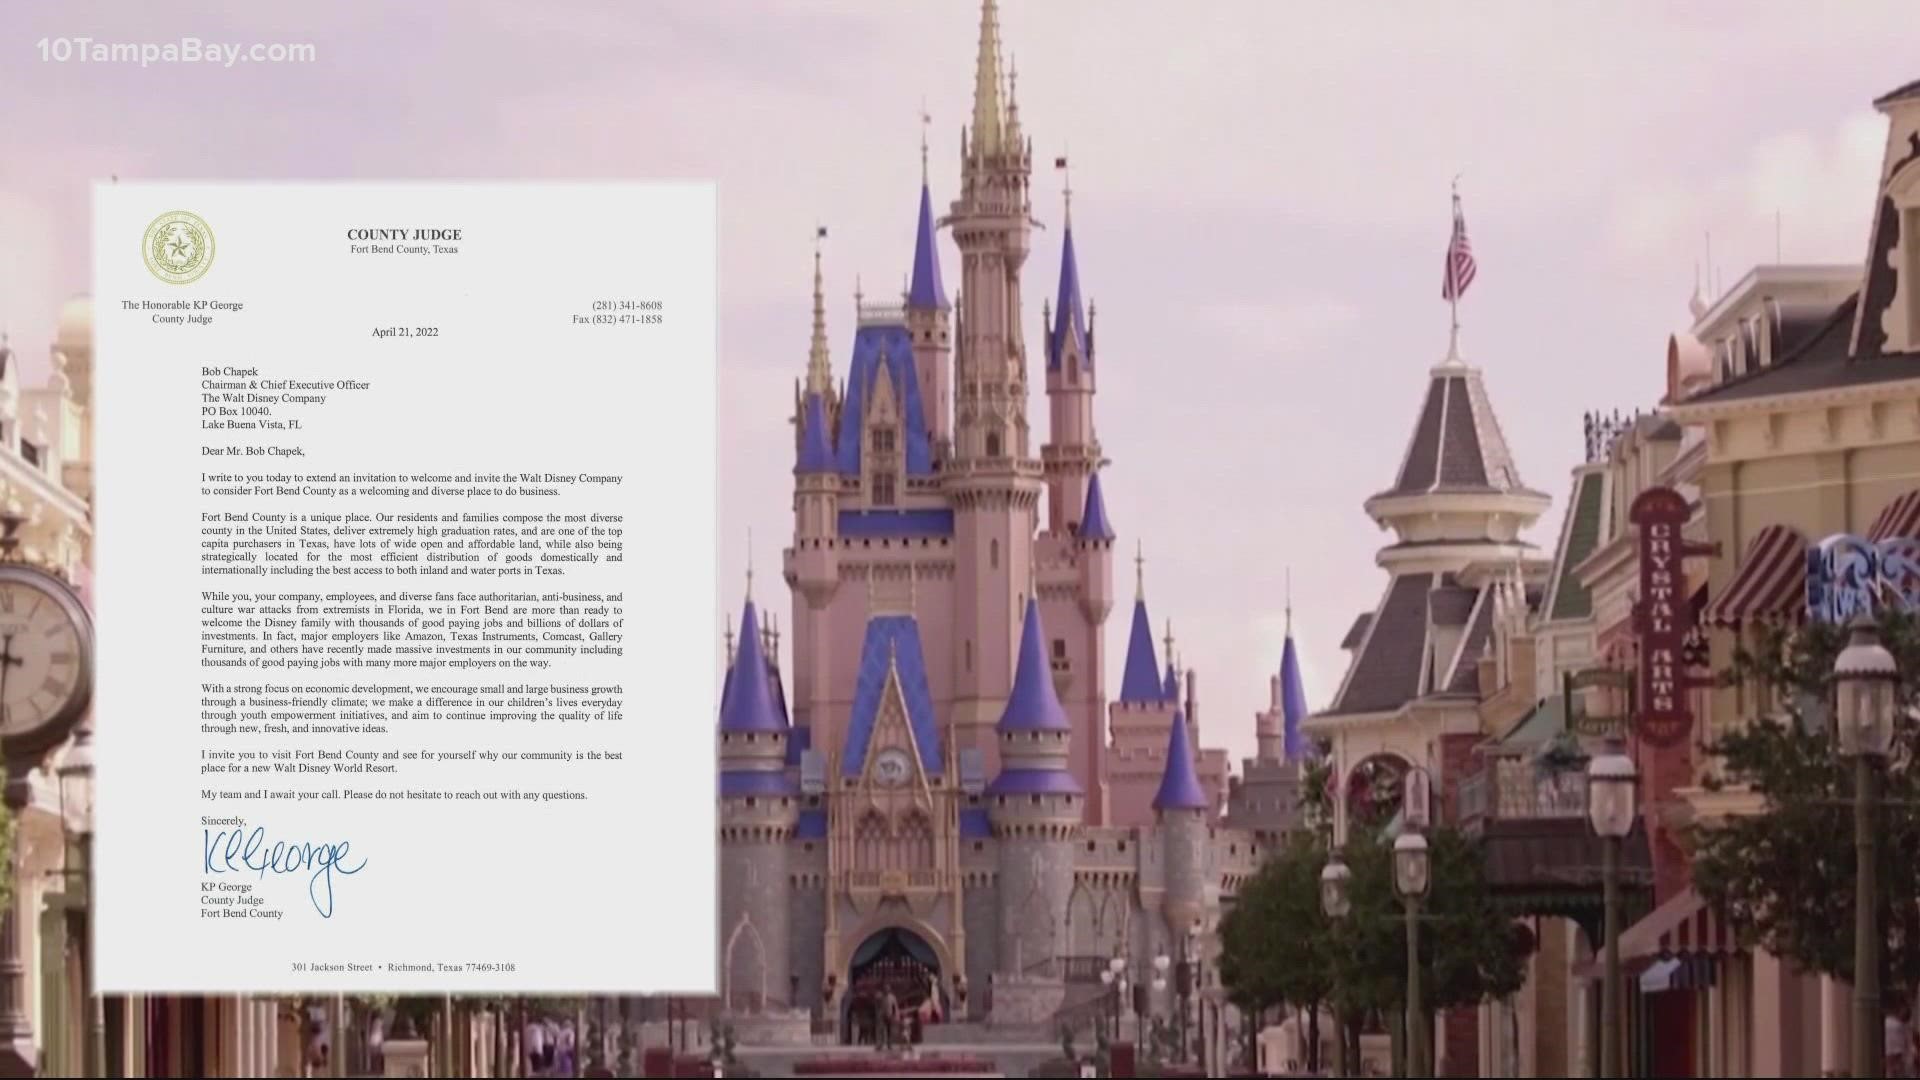 A Texas judge last week invited Disney to relocate from Florida during its ongoing feud with the government.